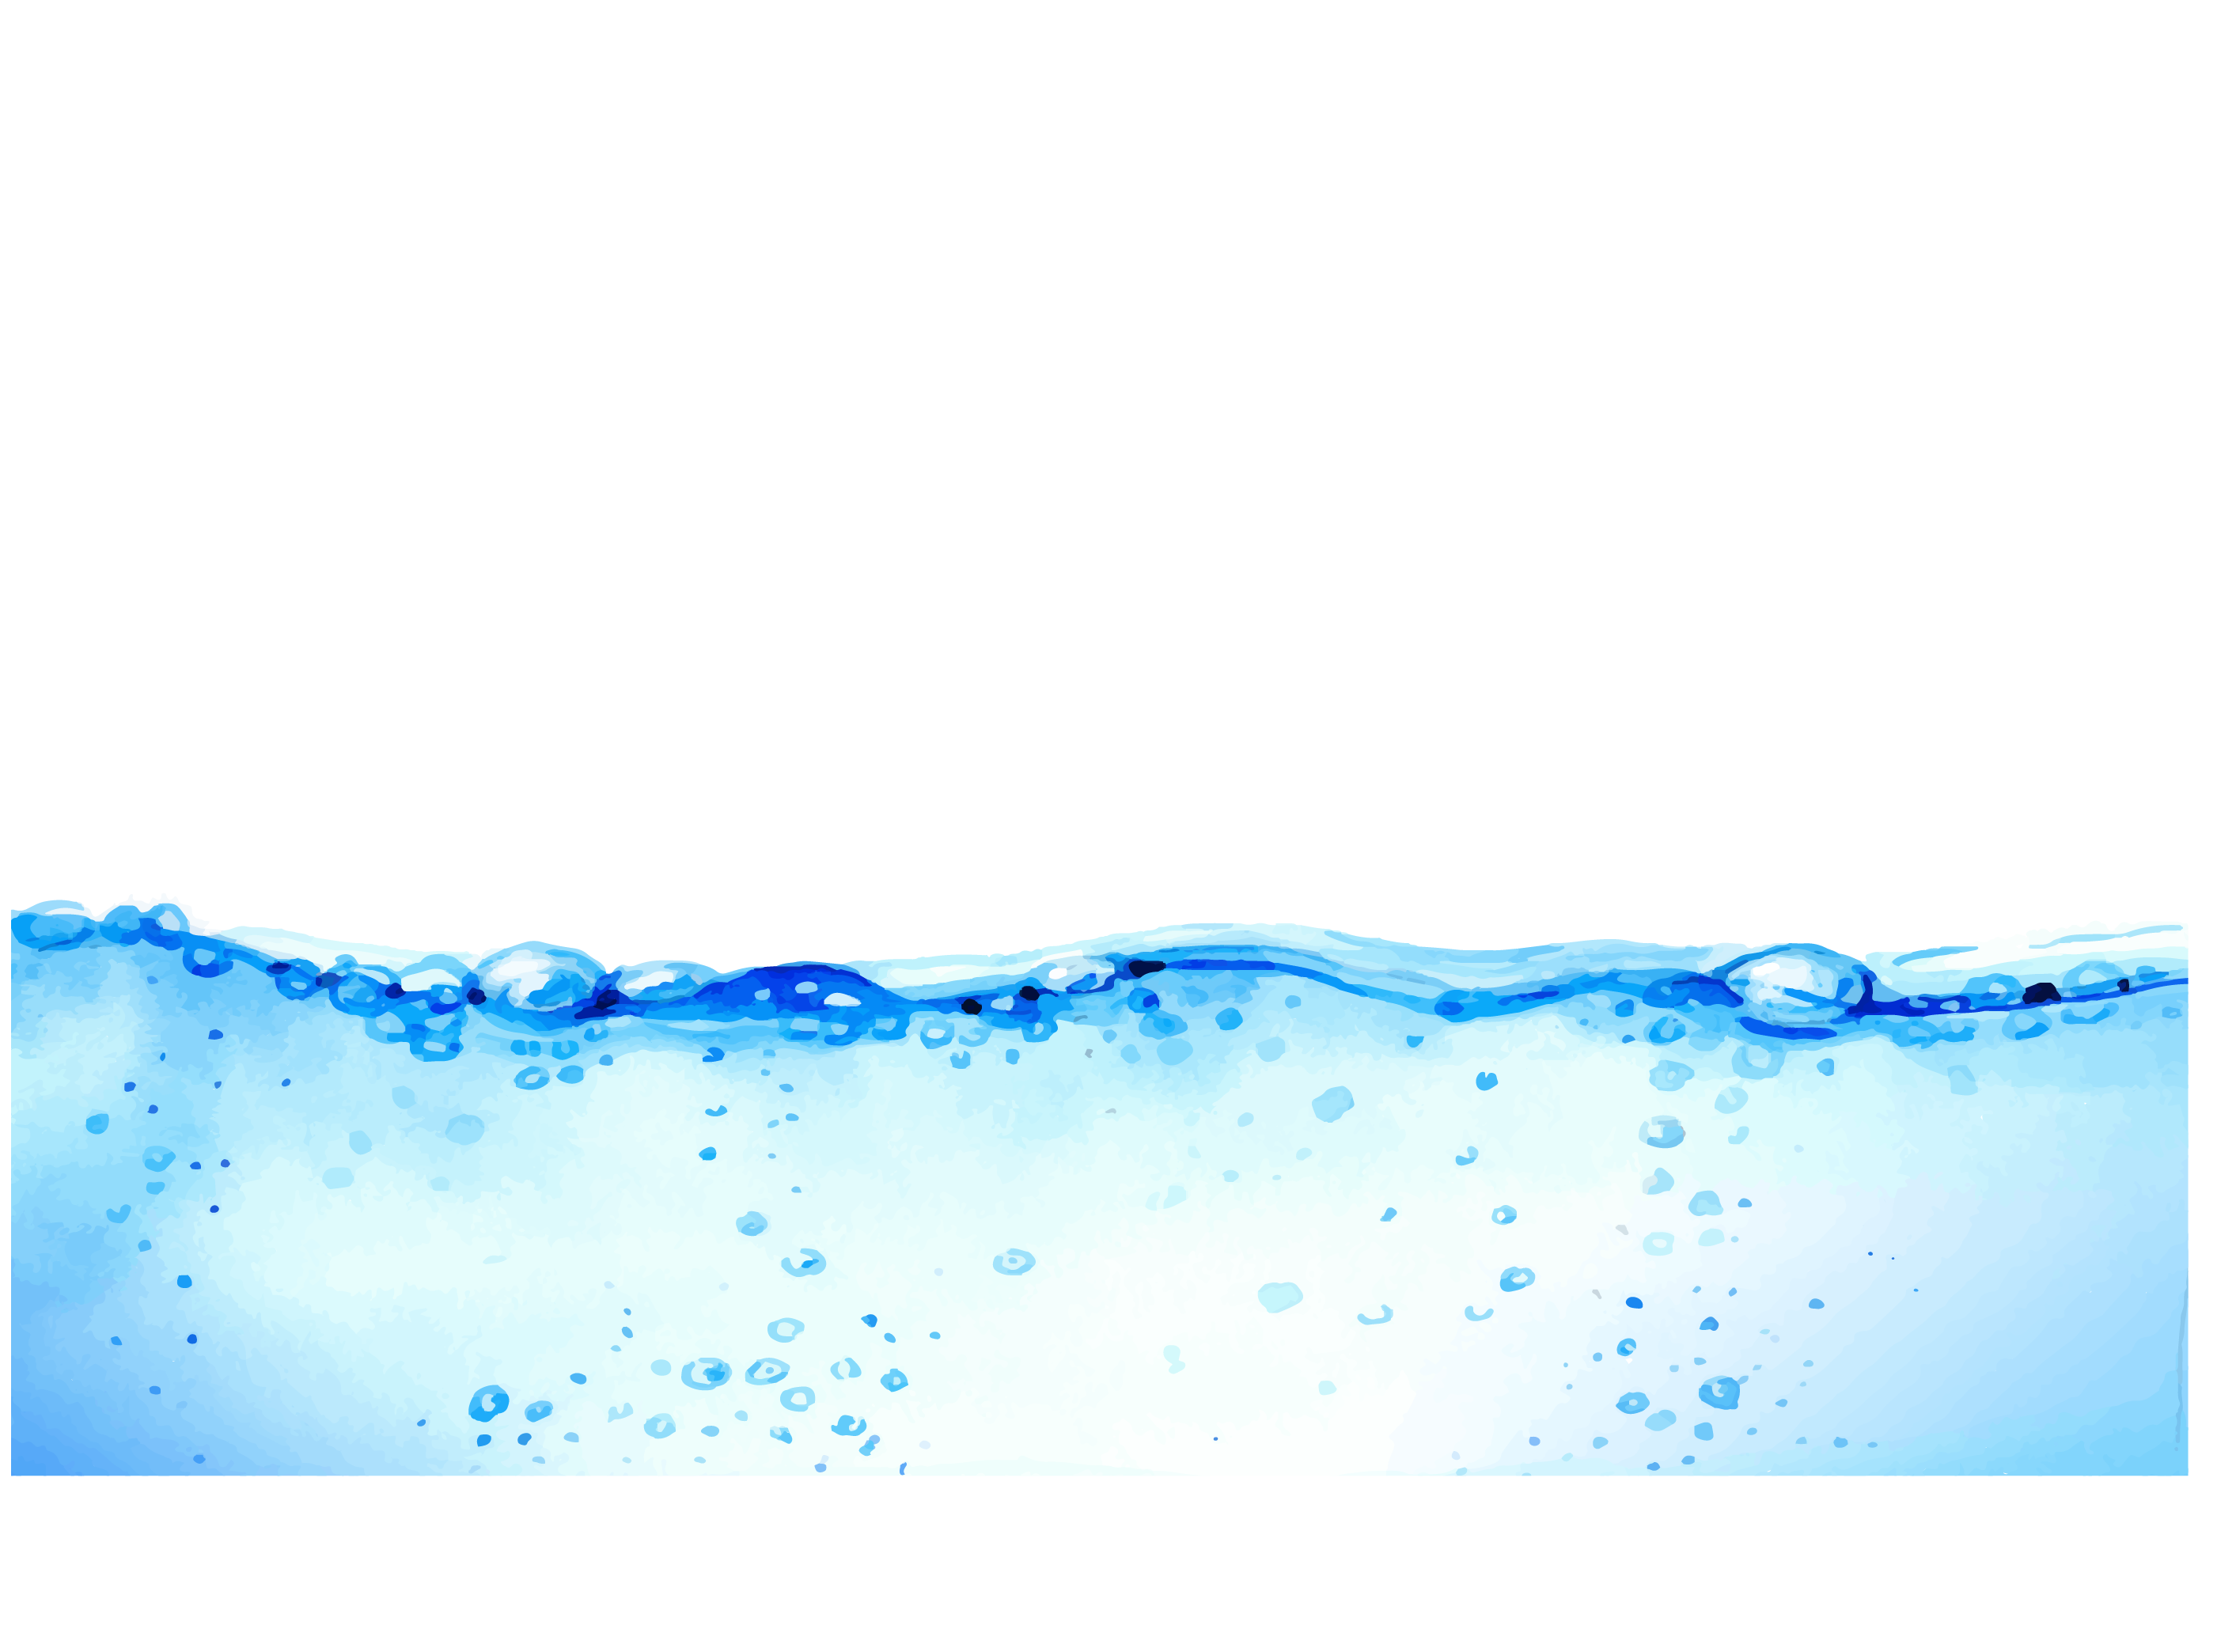 Png images transparent pictures. Water clipart sky